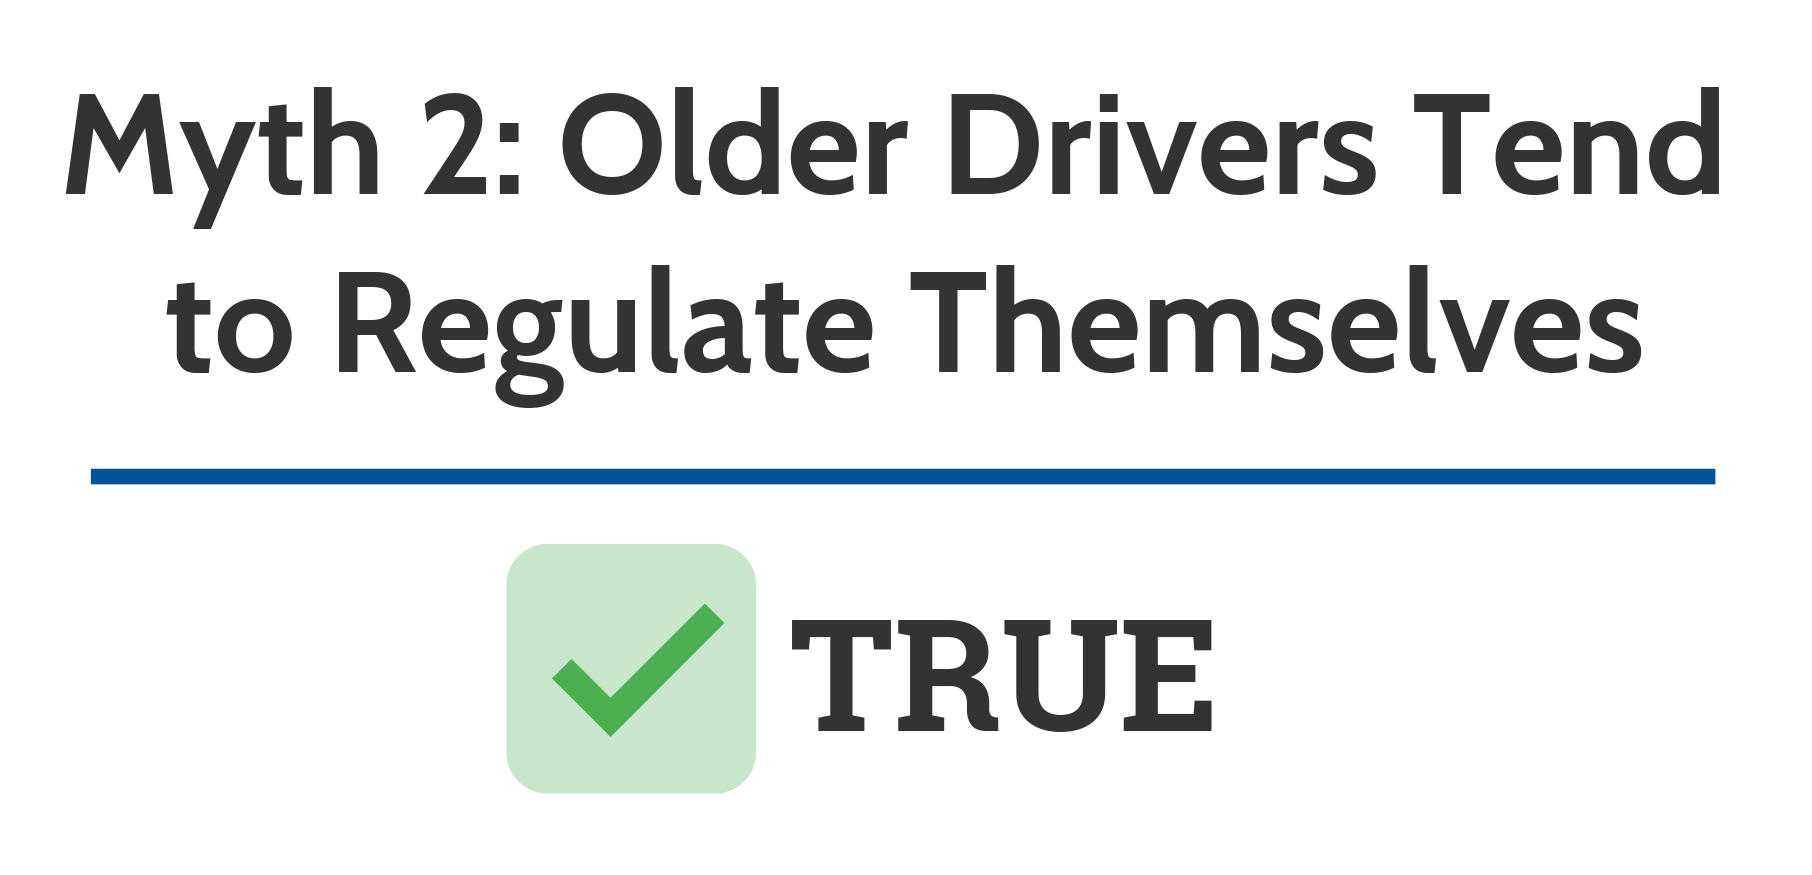 Older Drivers Tend to Regulate Themselves